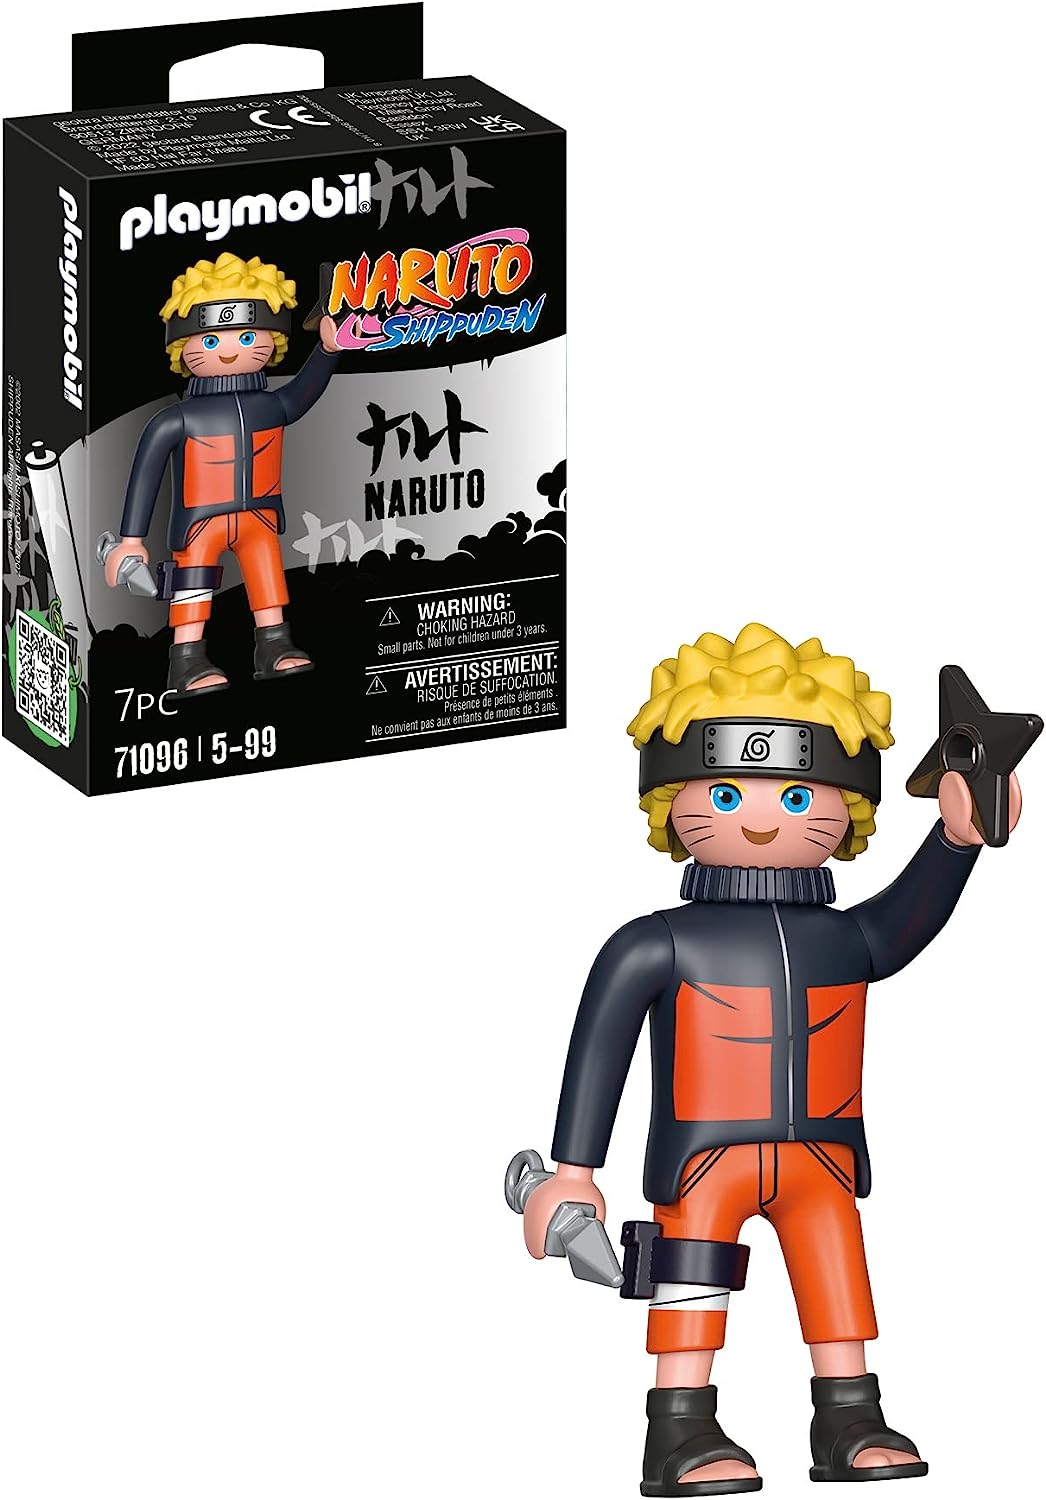 Playmobil Naruto Shippuden 71096 Naruto Uzumaki with Shuriken and Kunai, Creative Fun for Anime Fans With Great Details and Authentic Extras, 7 Pieces, From 5 Years